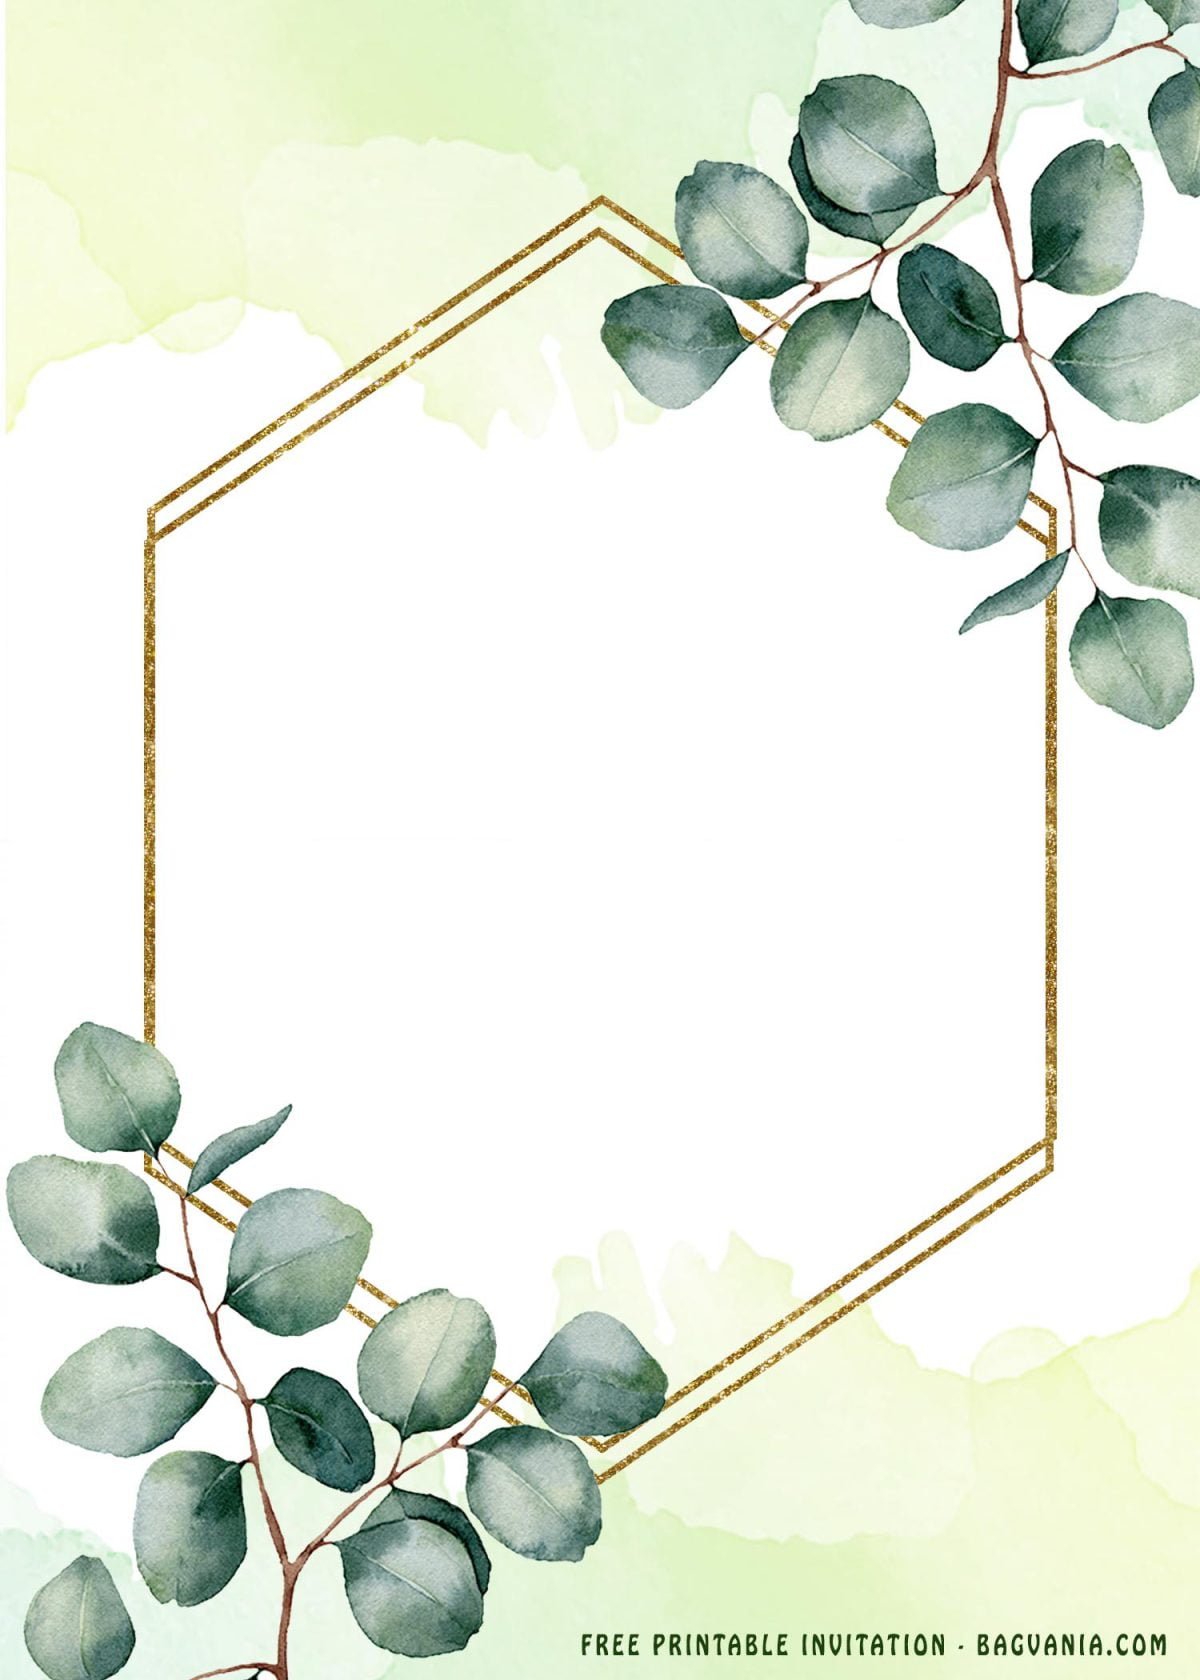 Free Printable Greenery Gold Frame Invitation Templates With White and Goldish Colored Background